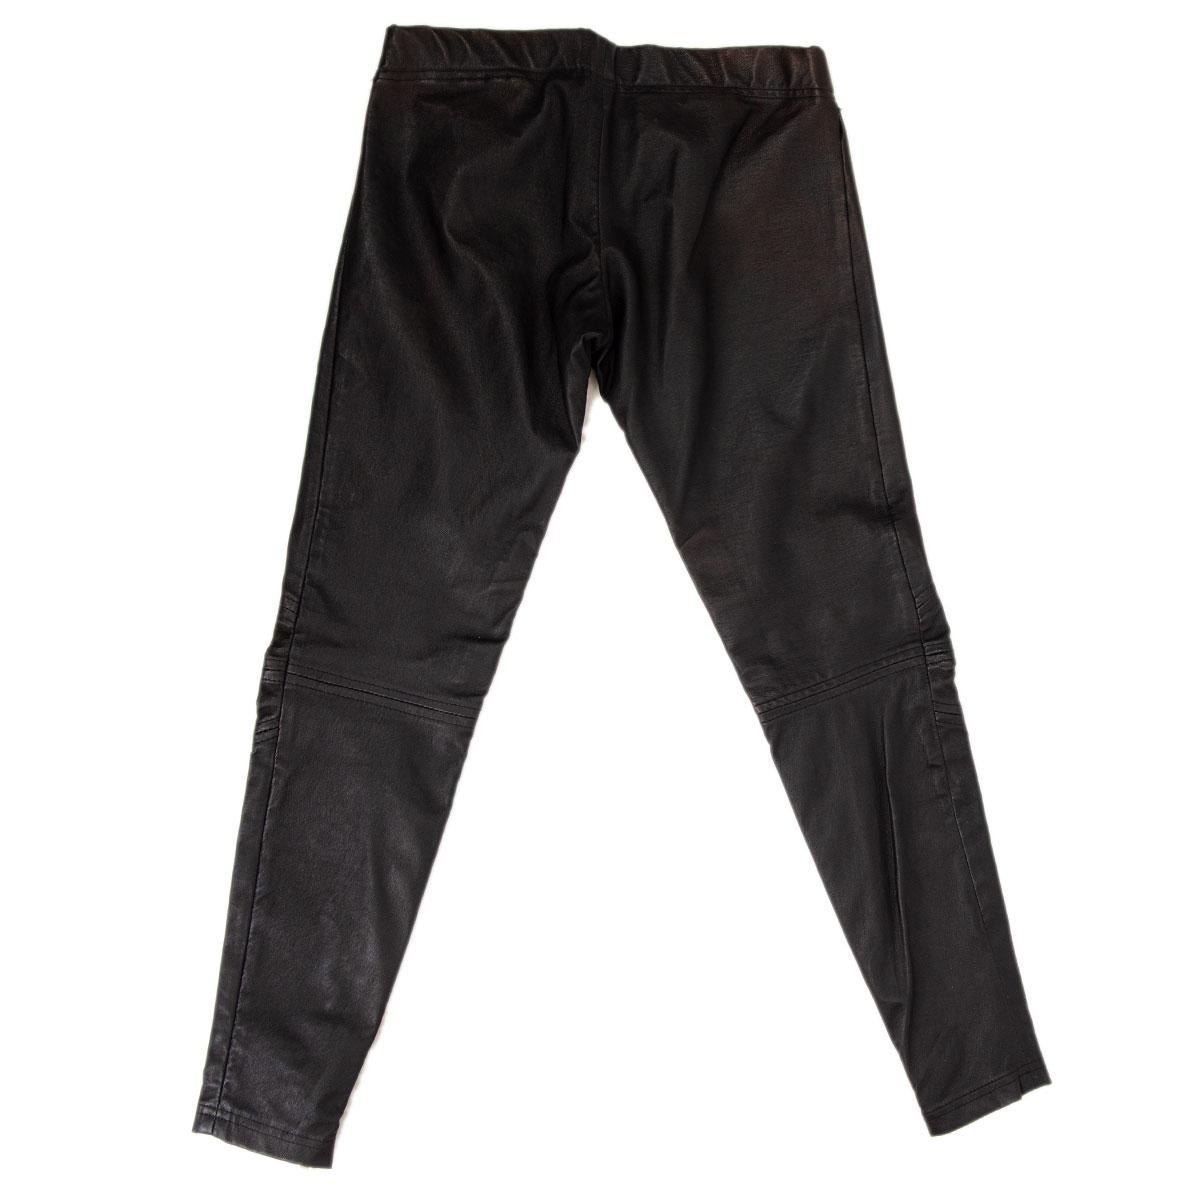 100% authentic Balmain biker zipper detail pants in black lambskin leather (100%). Slip-in fit. Unlined. Has been worn and is in excellent condition.

Measurements
Tag Size	40
Size	M
Waist From	72cm (28.1in)
Hips From	82cm (32in)
Length	88cm